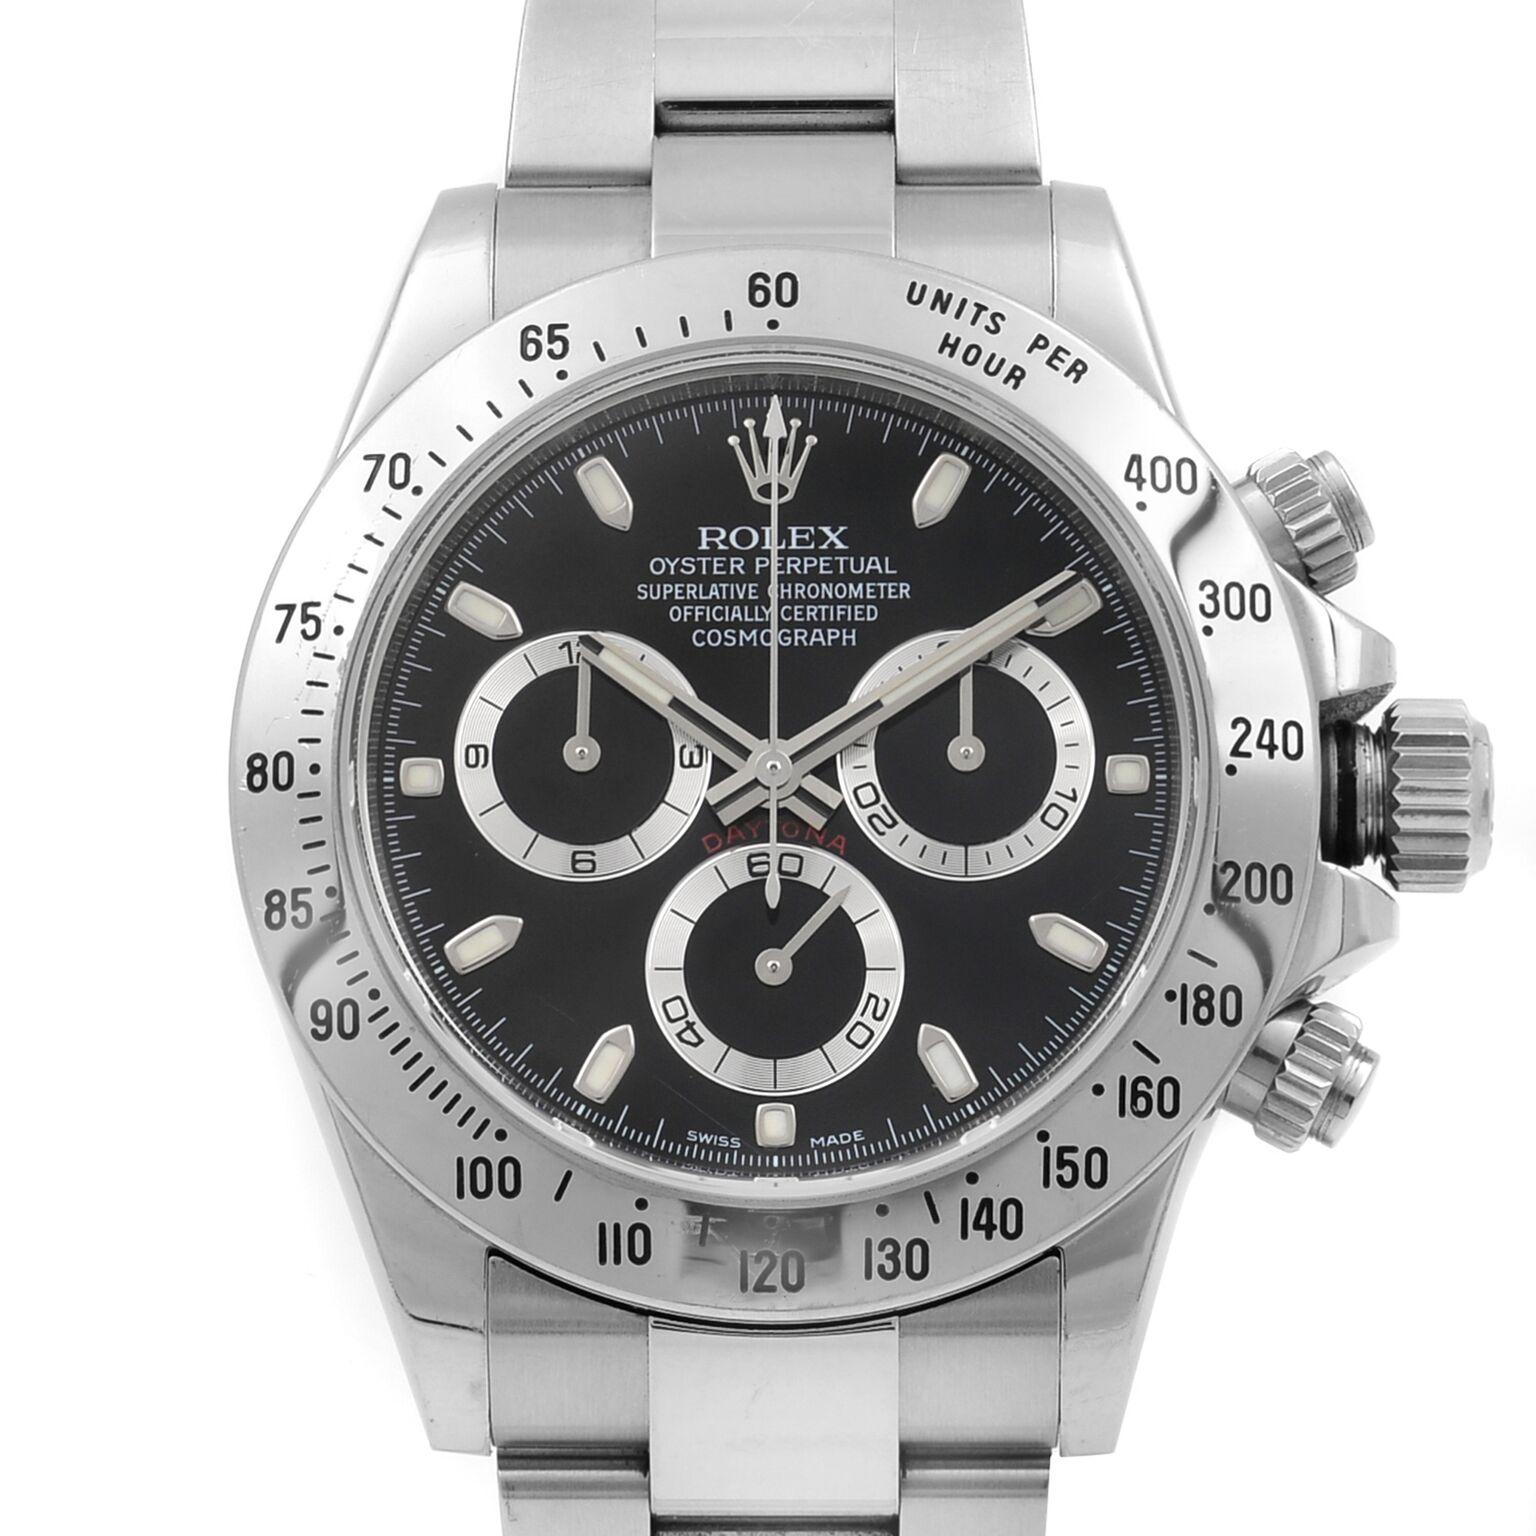 This pre-owned Rolex Daytona 116520BKSO is a beautiful men's timepiece that is powered by a mechanical (automatic) movement which is cased in a stainless steel case. It has a round shape face, chronograph, chronograph hand, small seconds subdial,